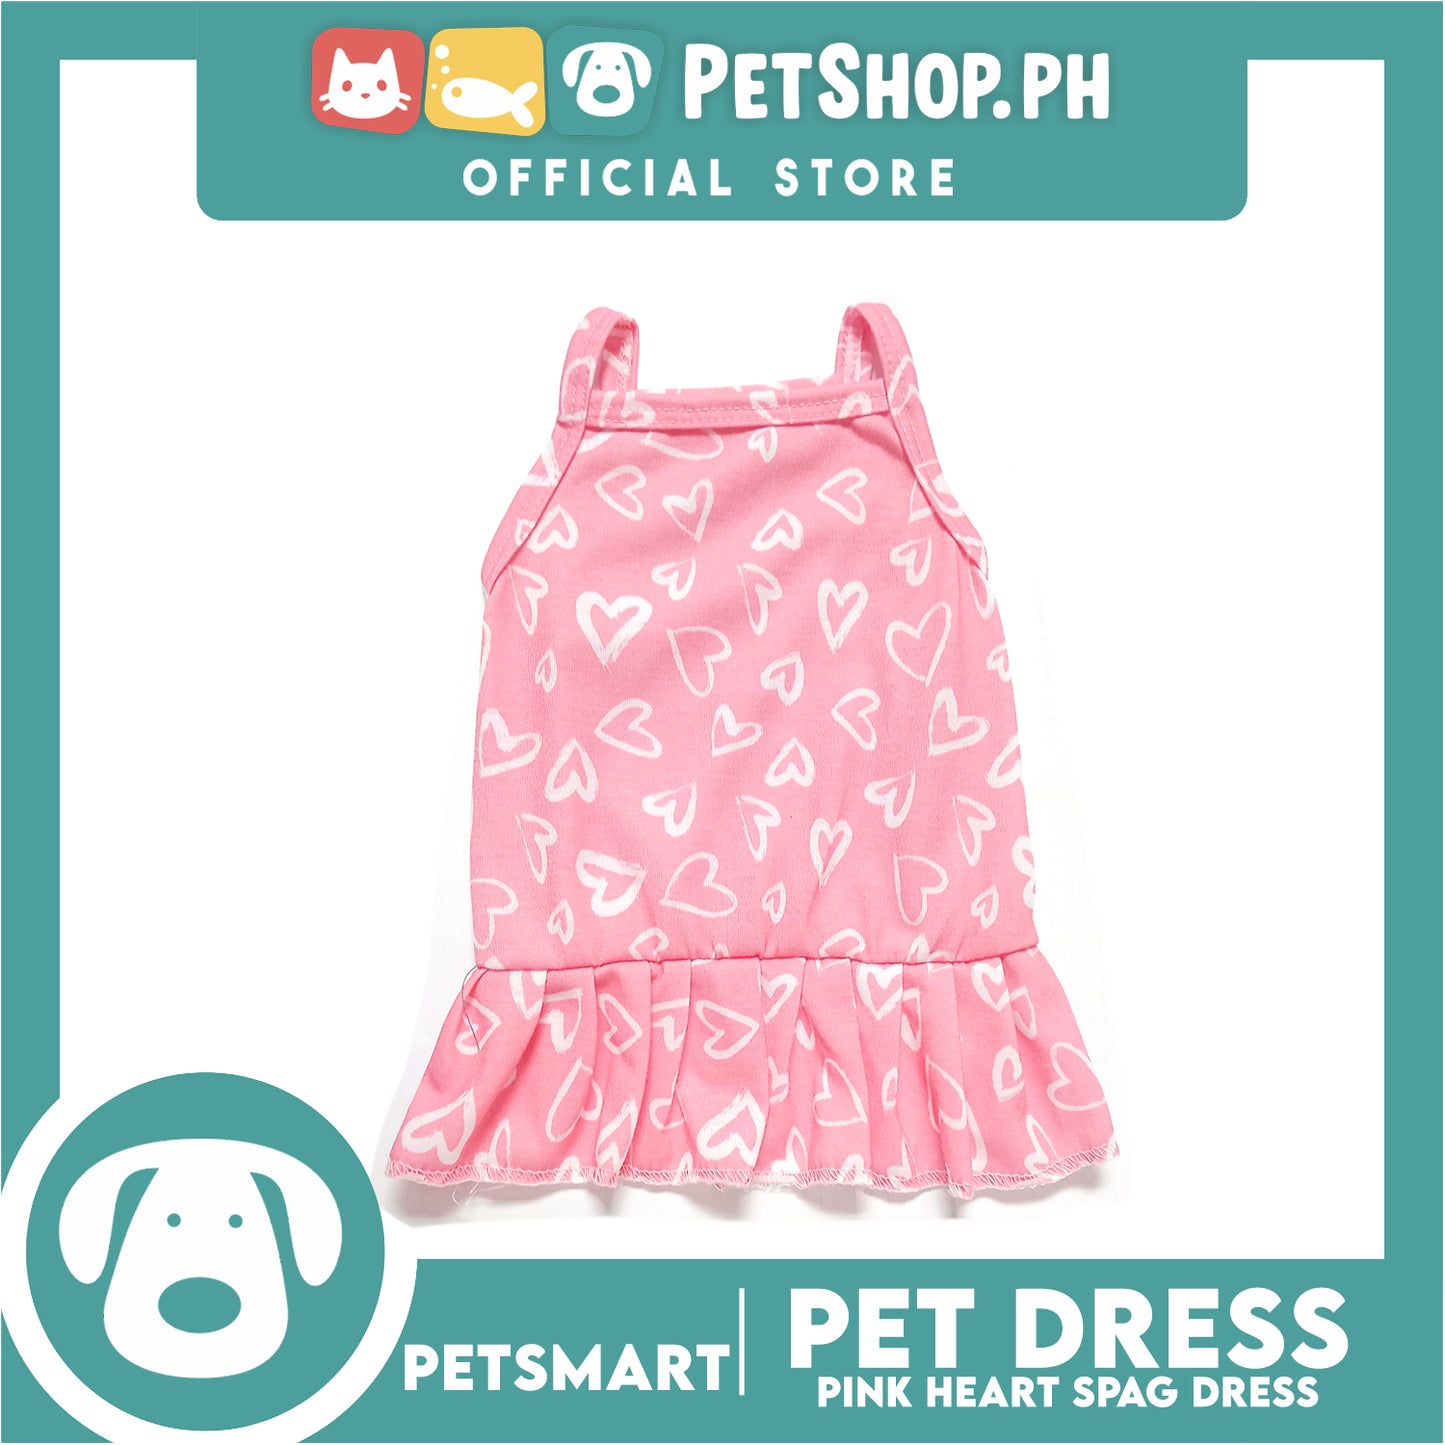 Pet Dress Pink Heart Spaghetti Dress DG-CTN118S (Small) Perfect Fit For Dogs And Cats, Pet Dress Clothes, Soft and Comfortable Pet Clothing